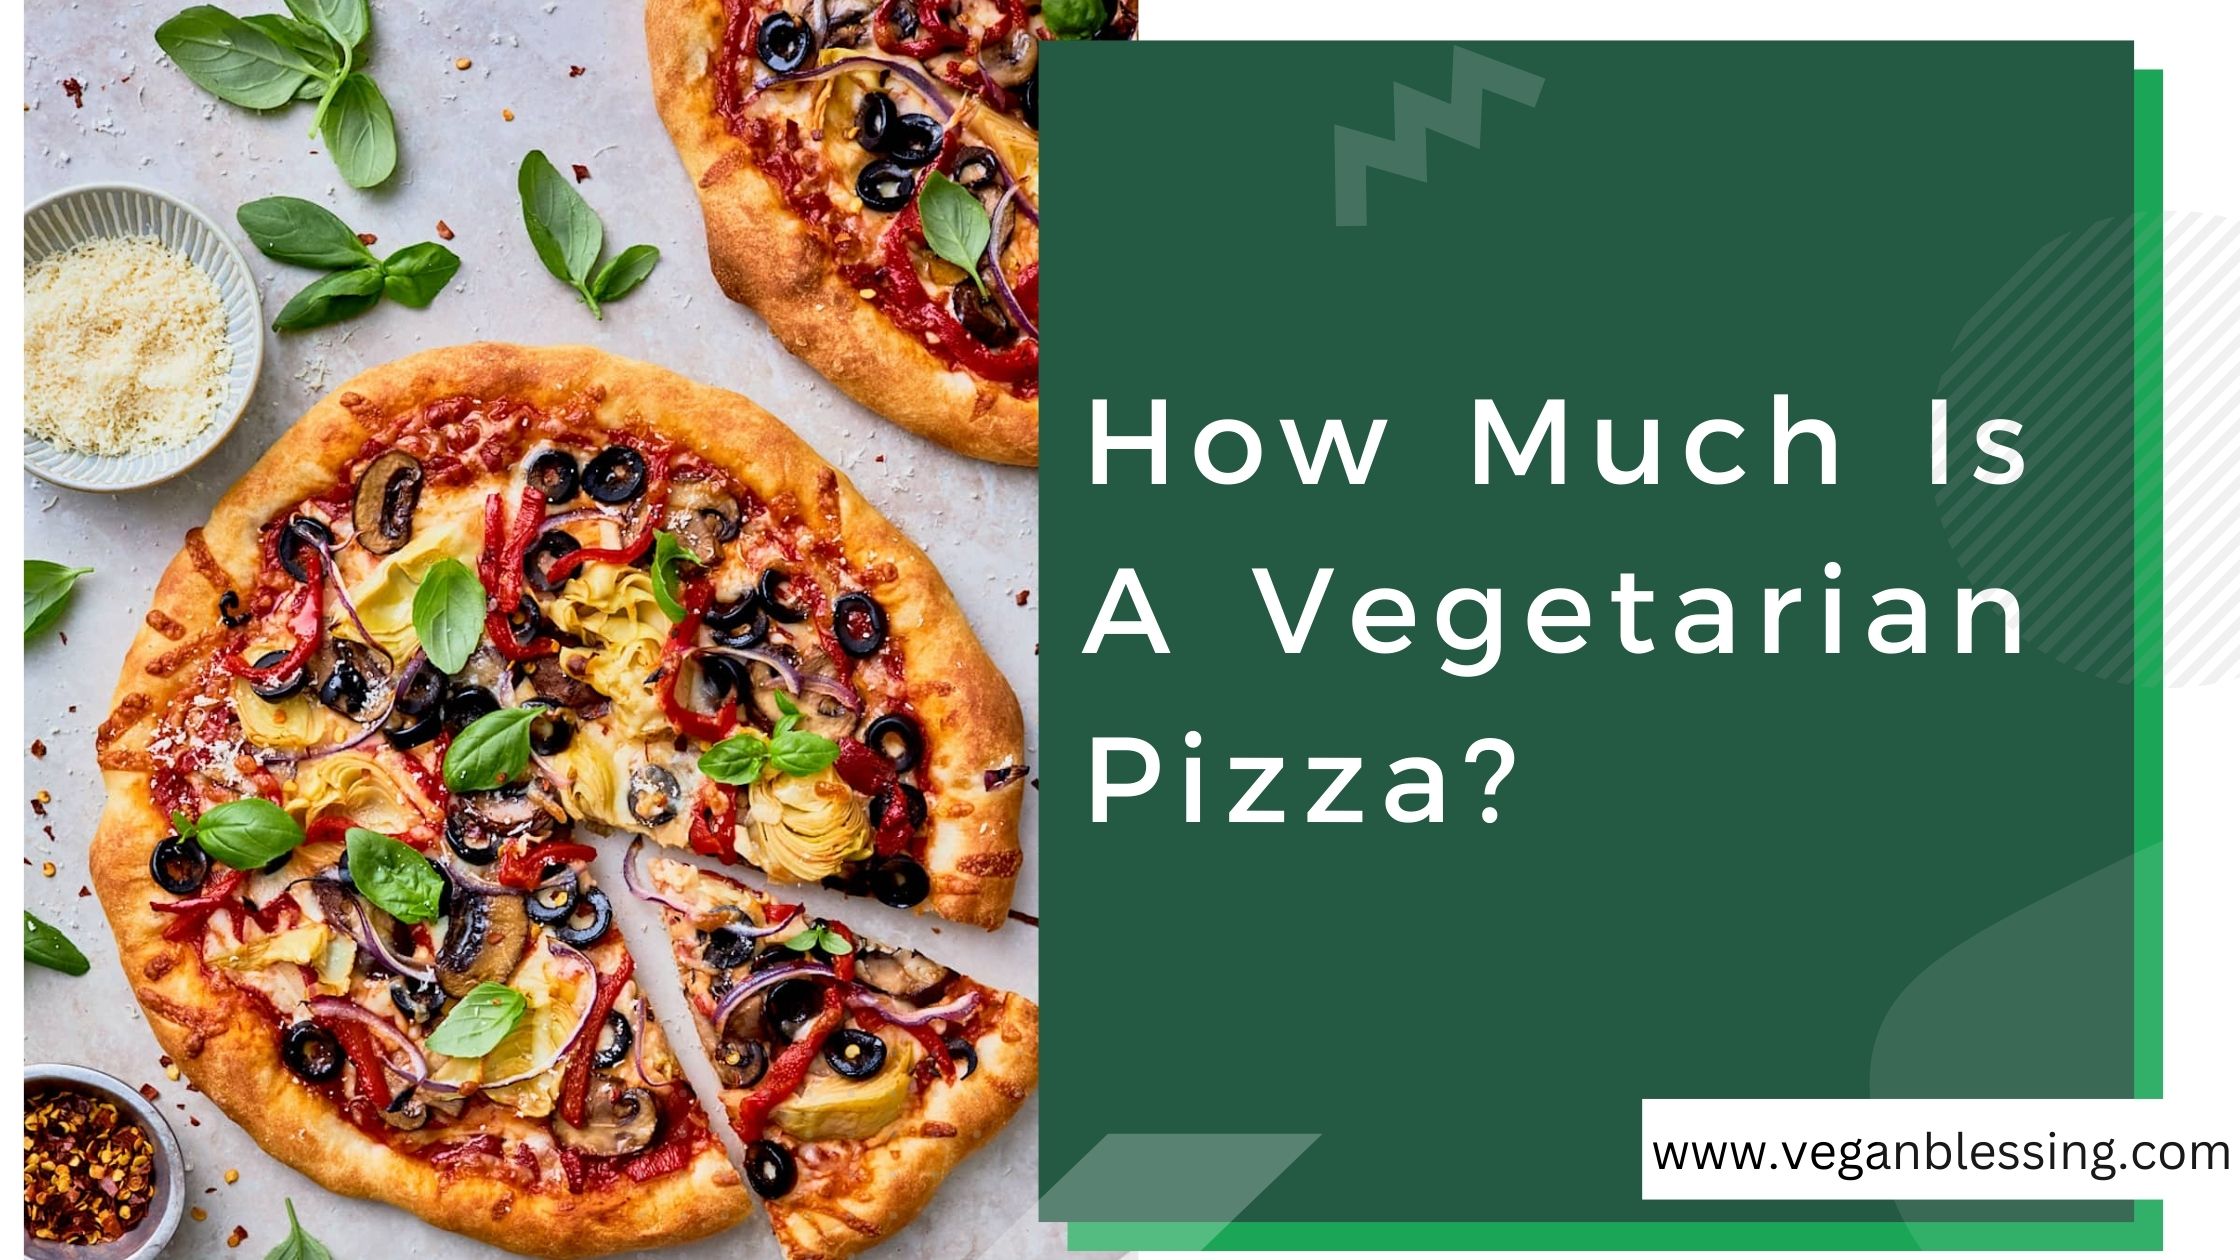 How Much Is A Vegetarian Pizza? How Much Is A Vegetarian Pizza